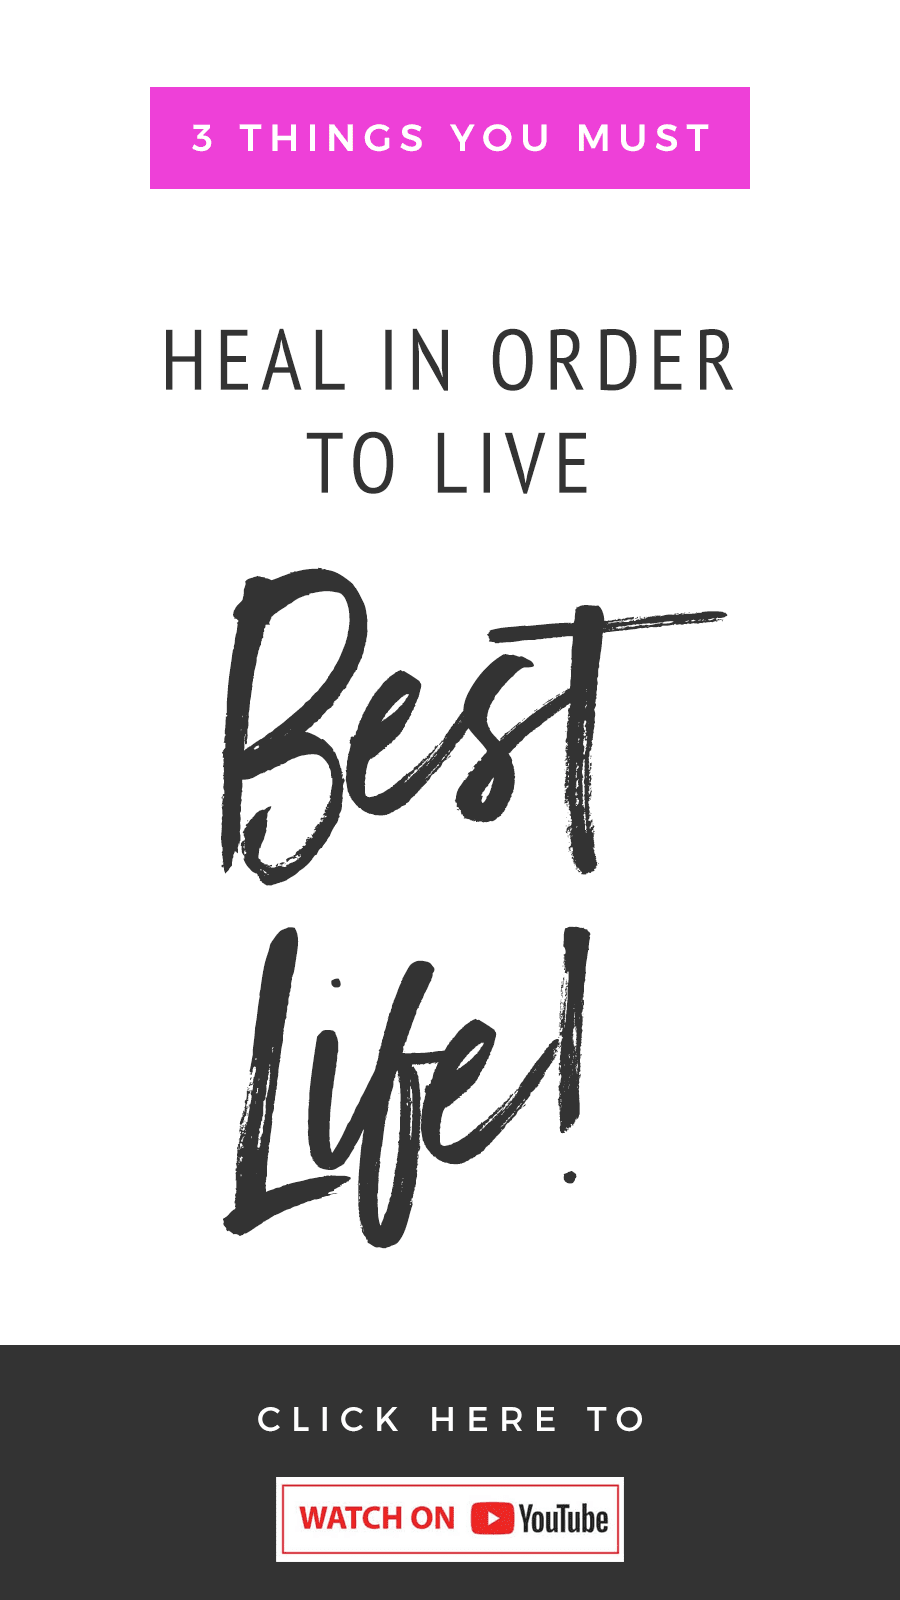 3 Things You Need To Heal To Live Your Best Life!